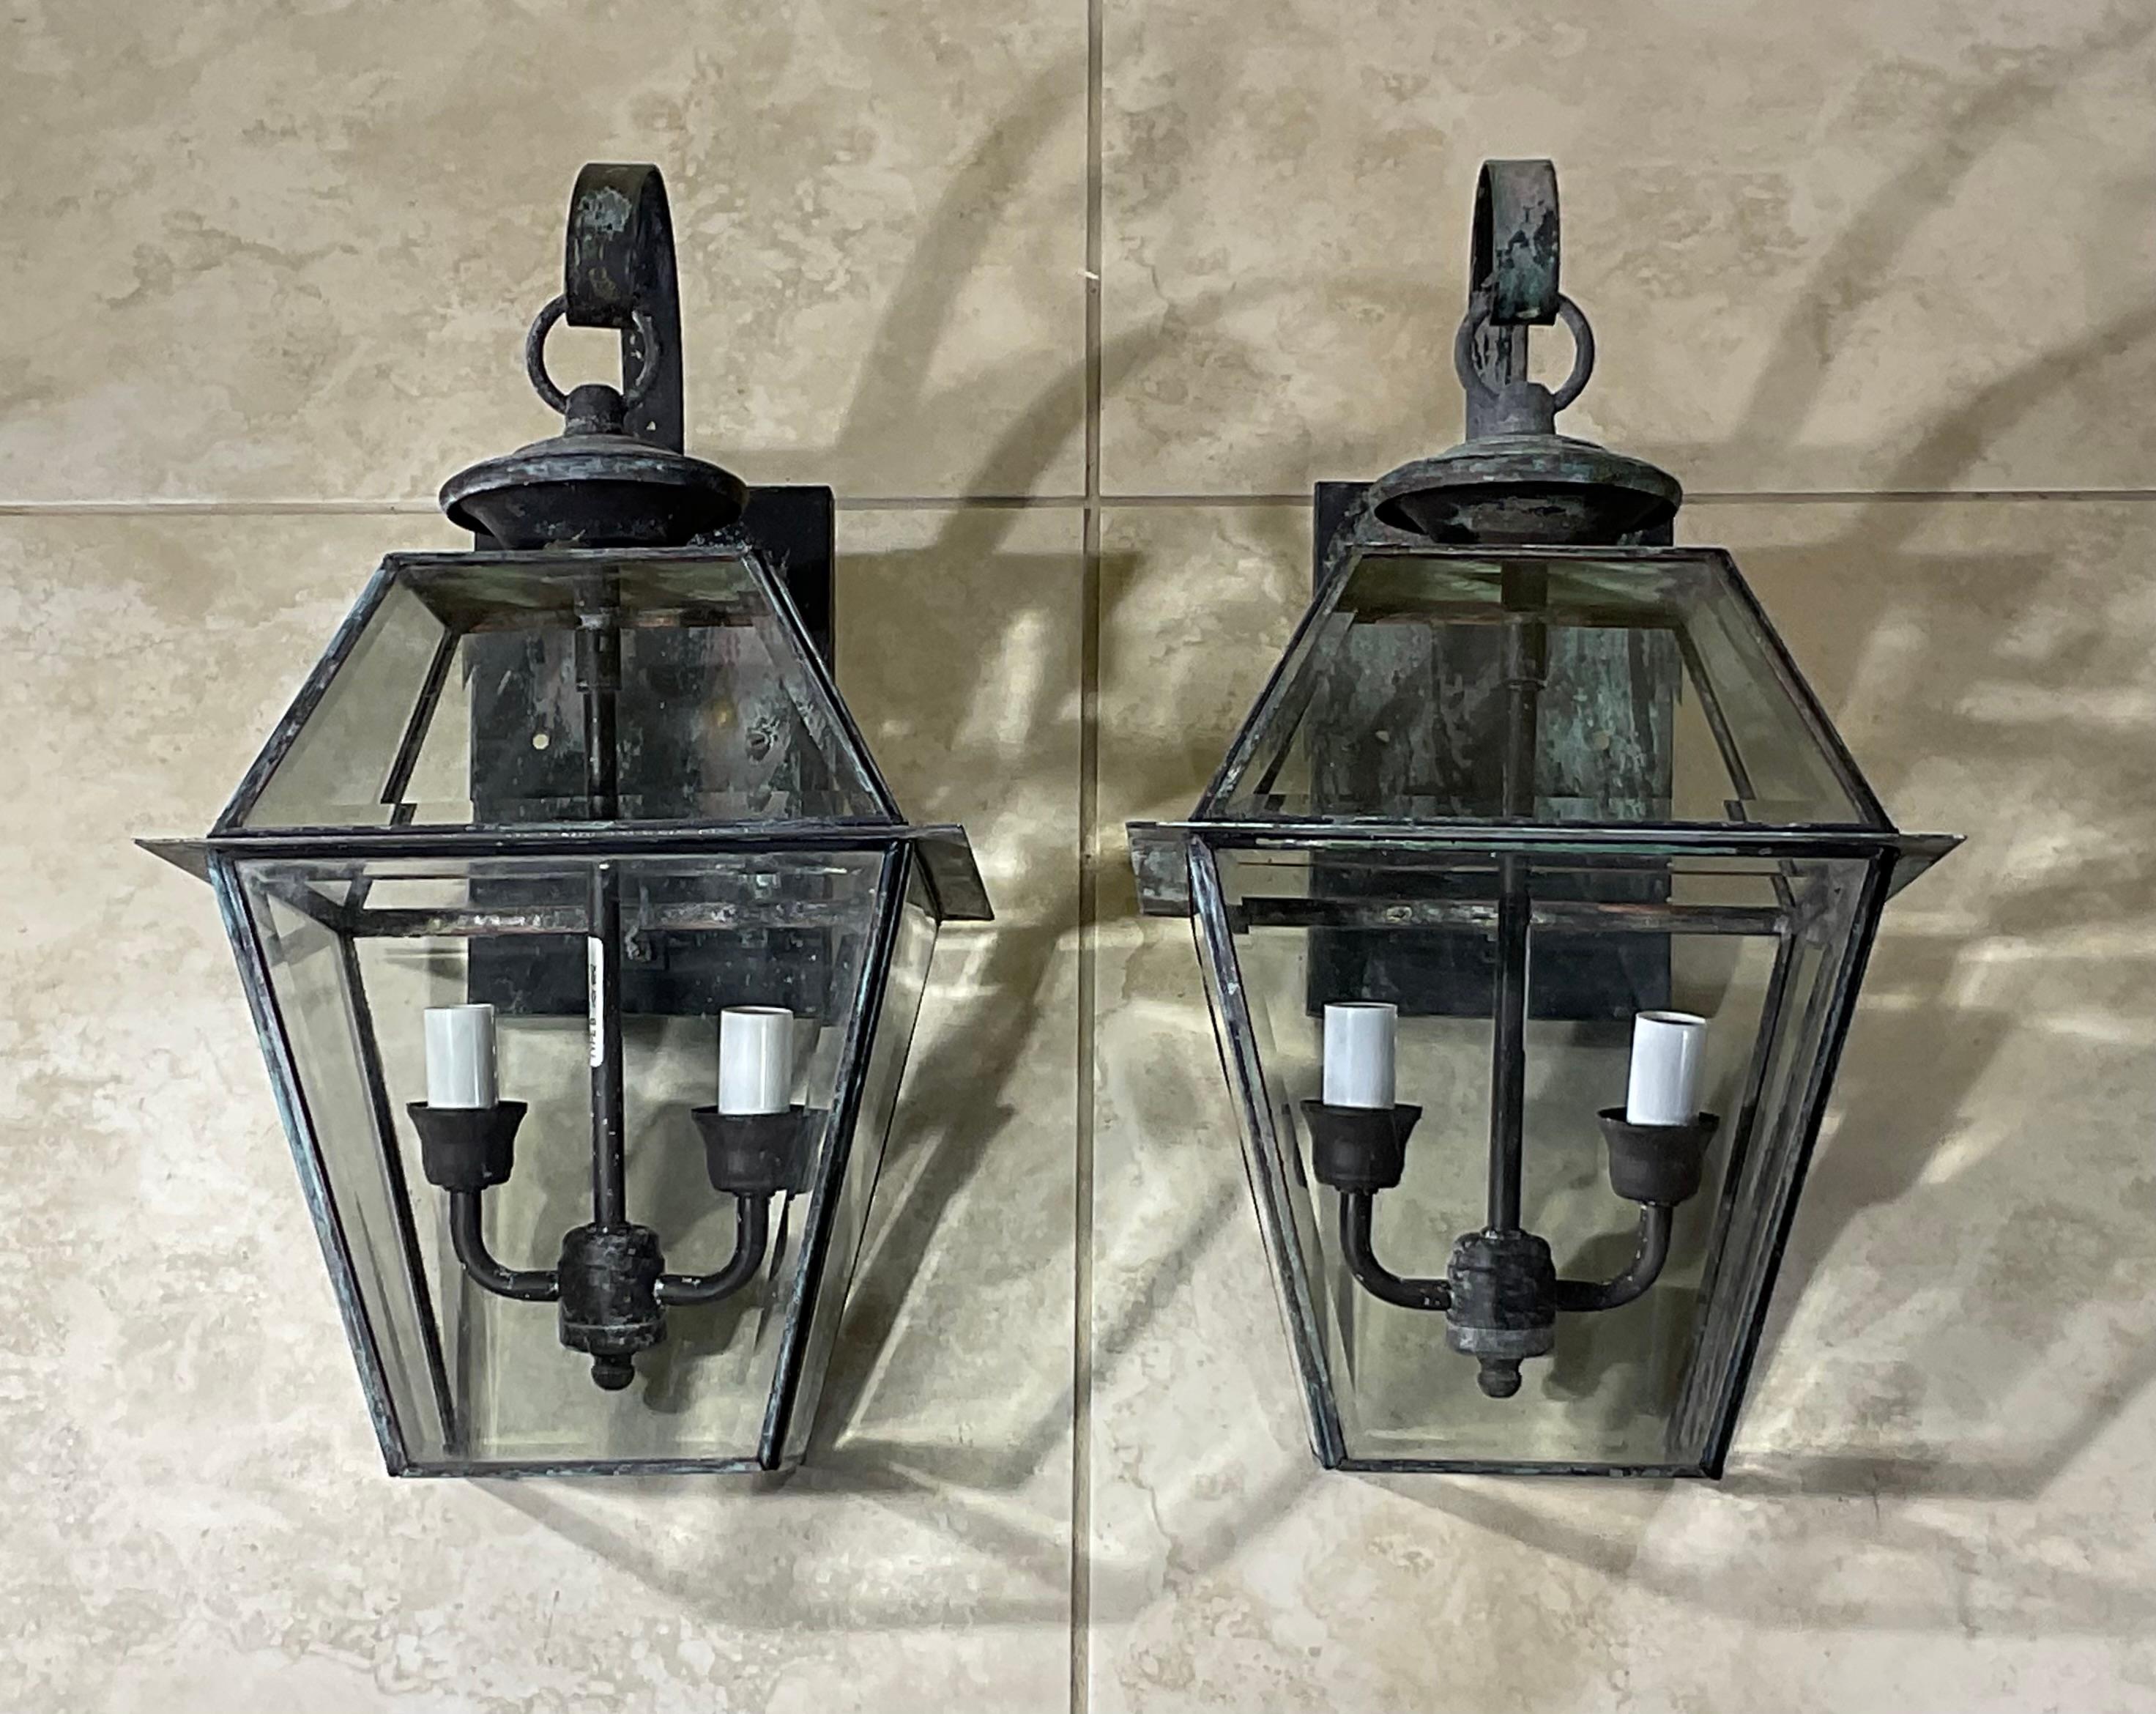 Elegant pair of wall lanterns made of brass, and thick decorative bevelled glass, electrified with brass cluster 0f two 60/watt lights each lantern. 
Suitable for wet location / or will be great looking light indoor as wall sconces.